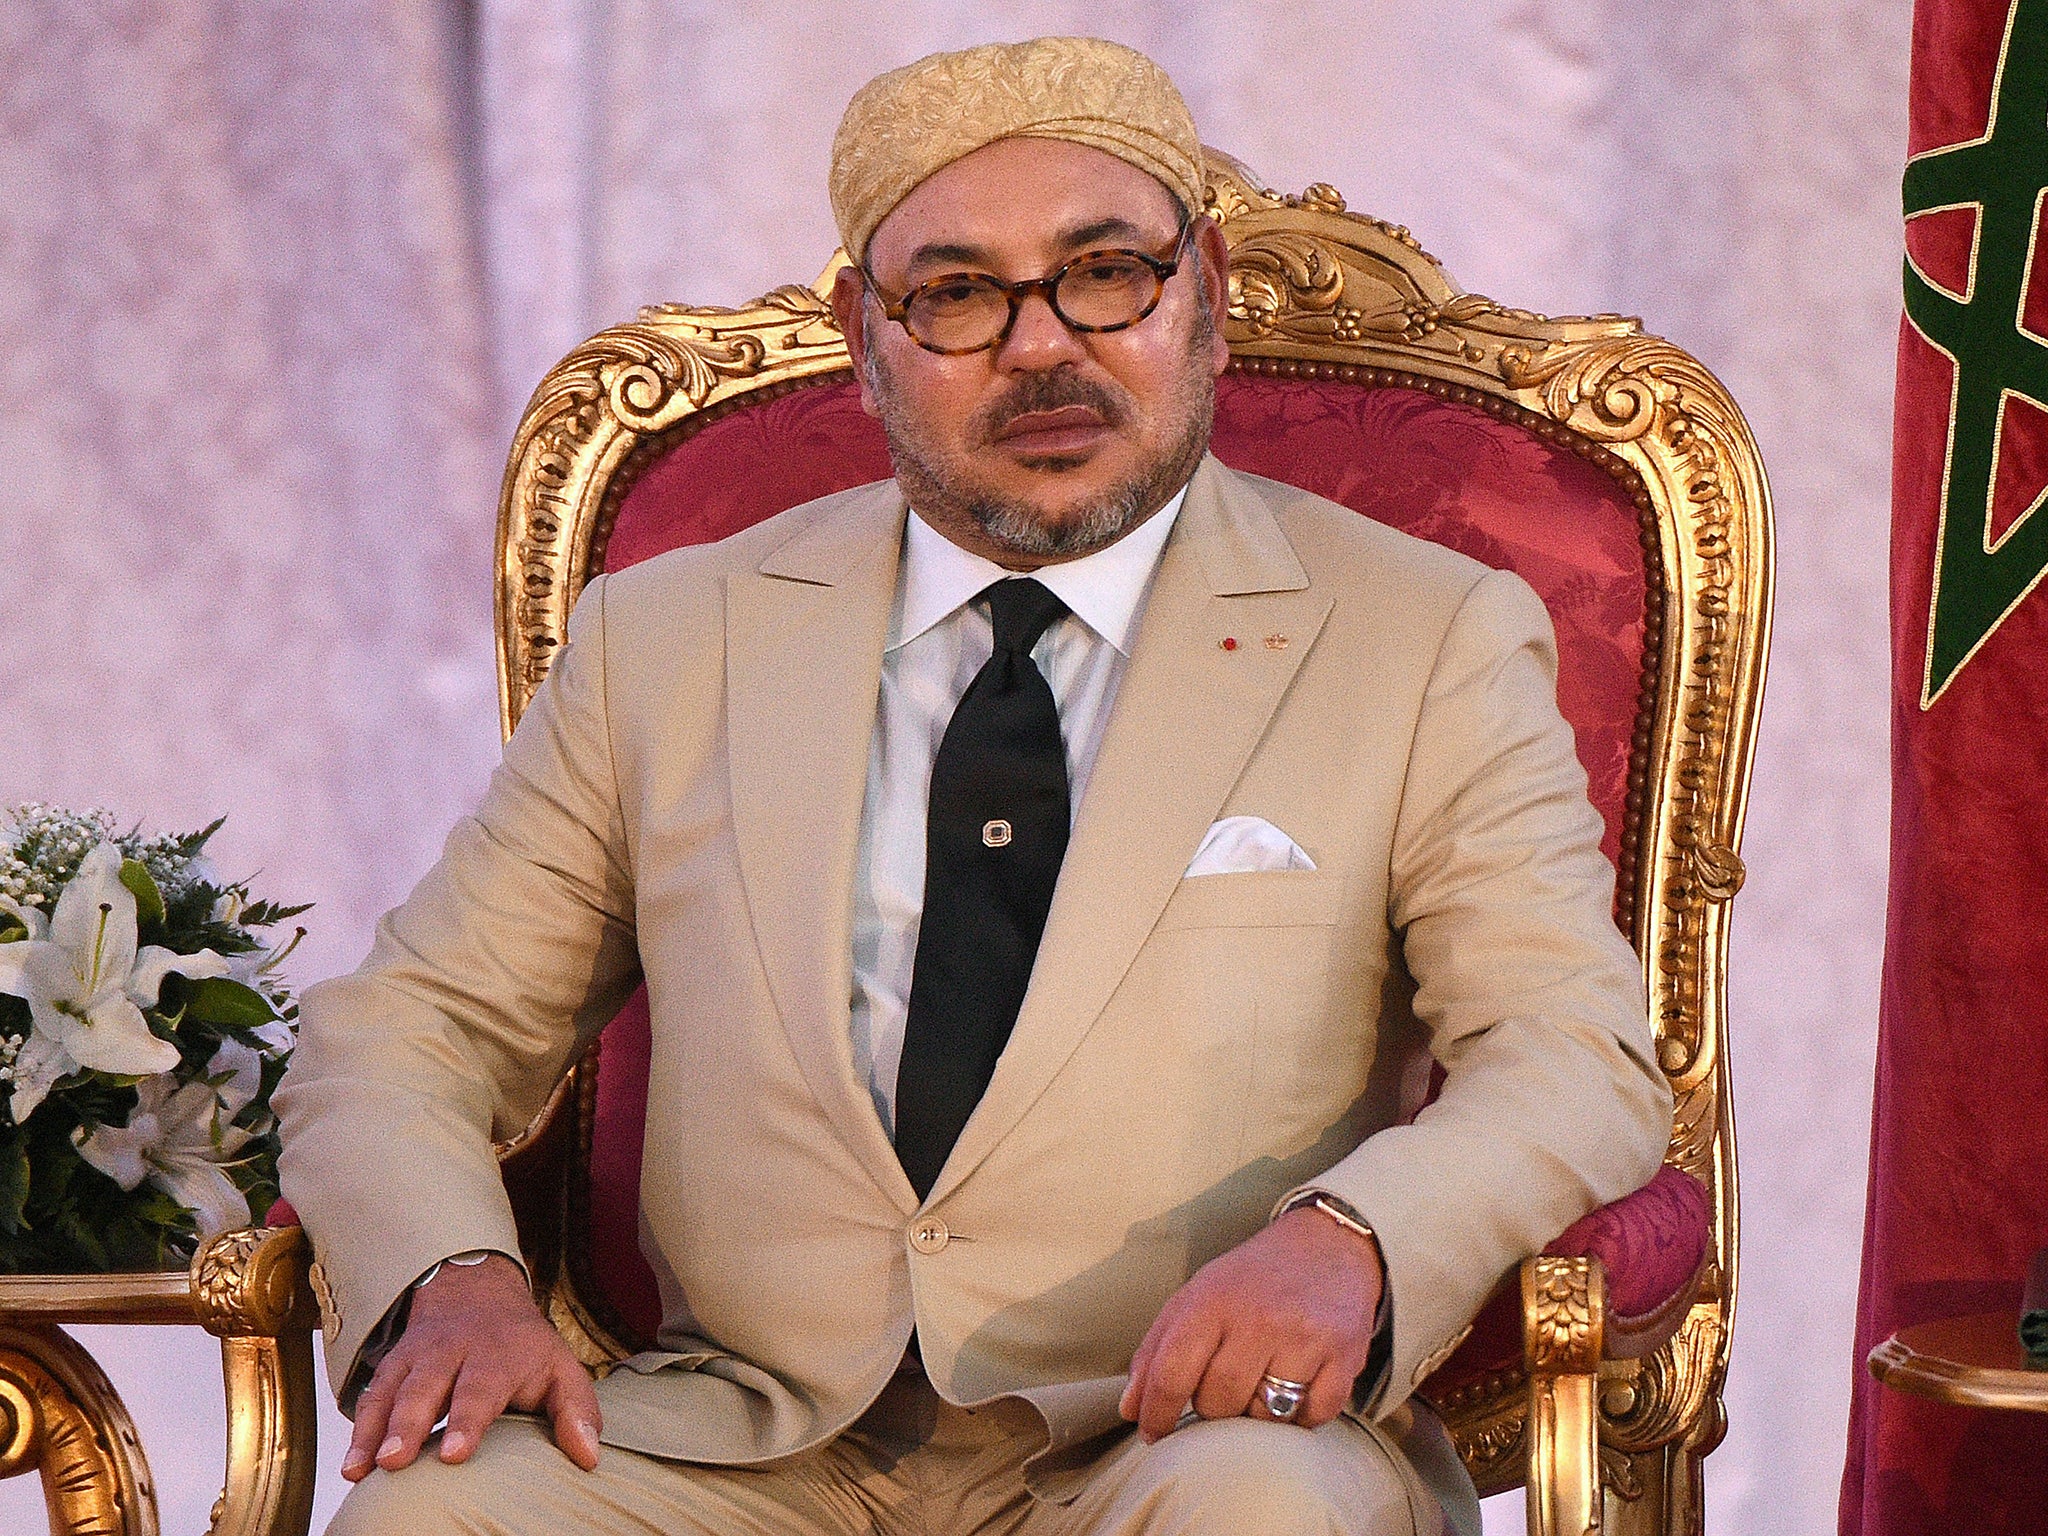 Morocco's King Mohammed VI looks on during the signing of an agreement with the French President in preparation of the COP21 climate talks in Paris